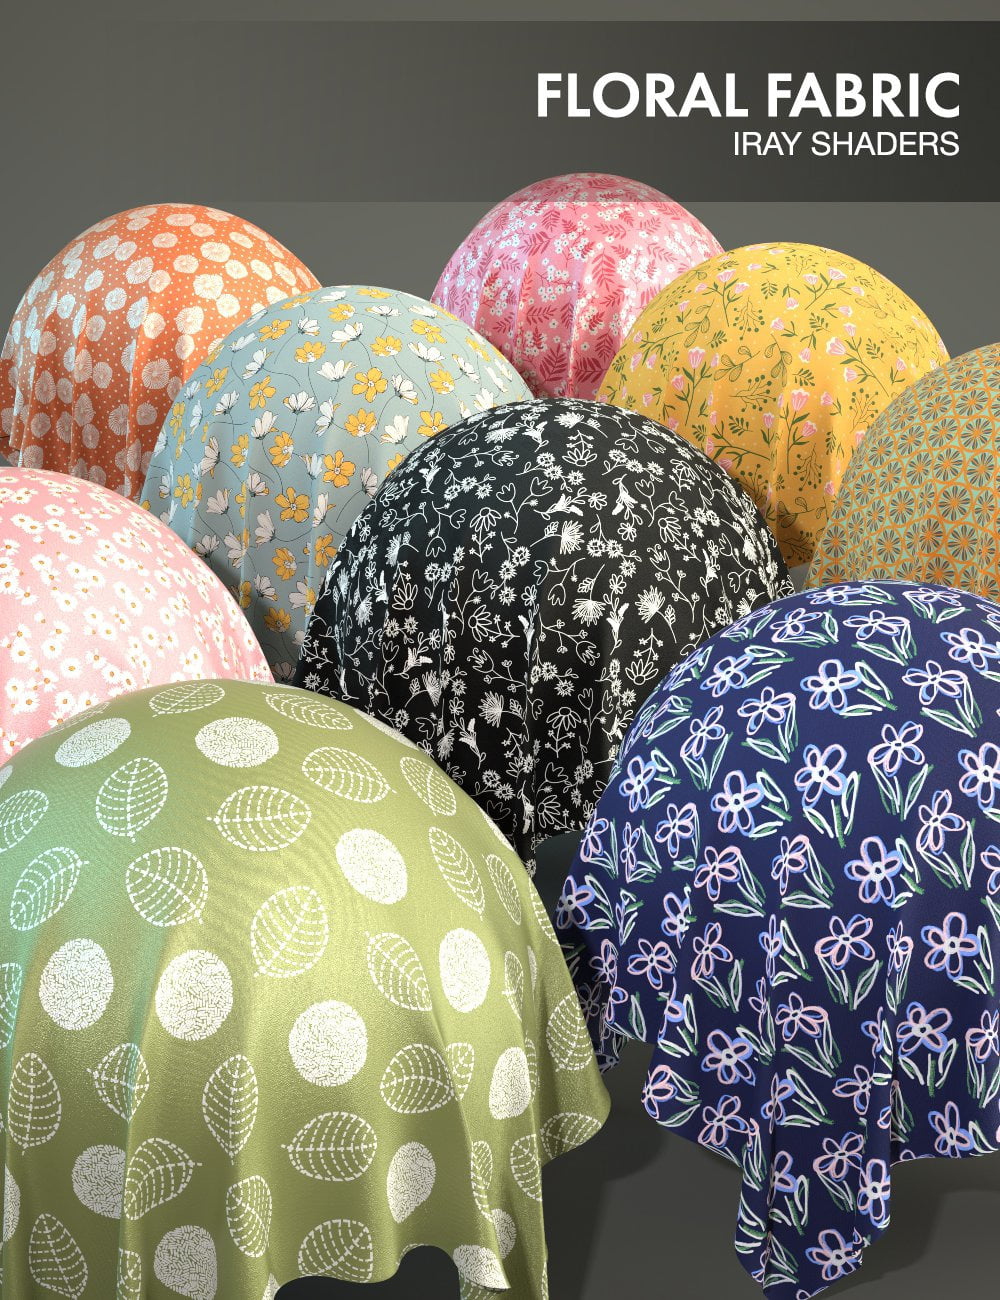 Floral Fabric - Iray Shaders